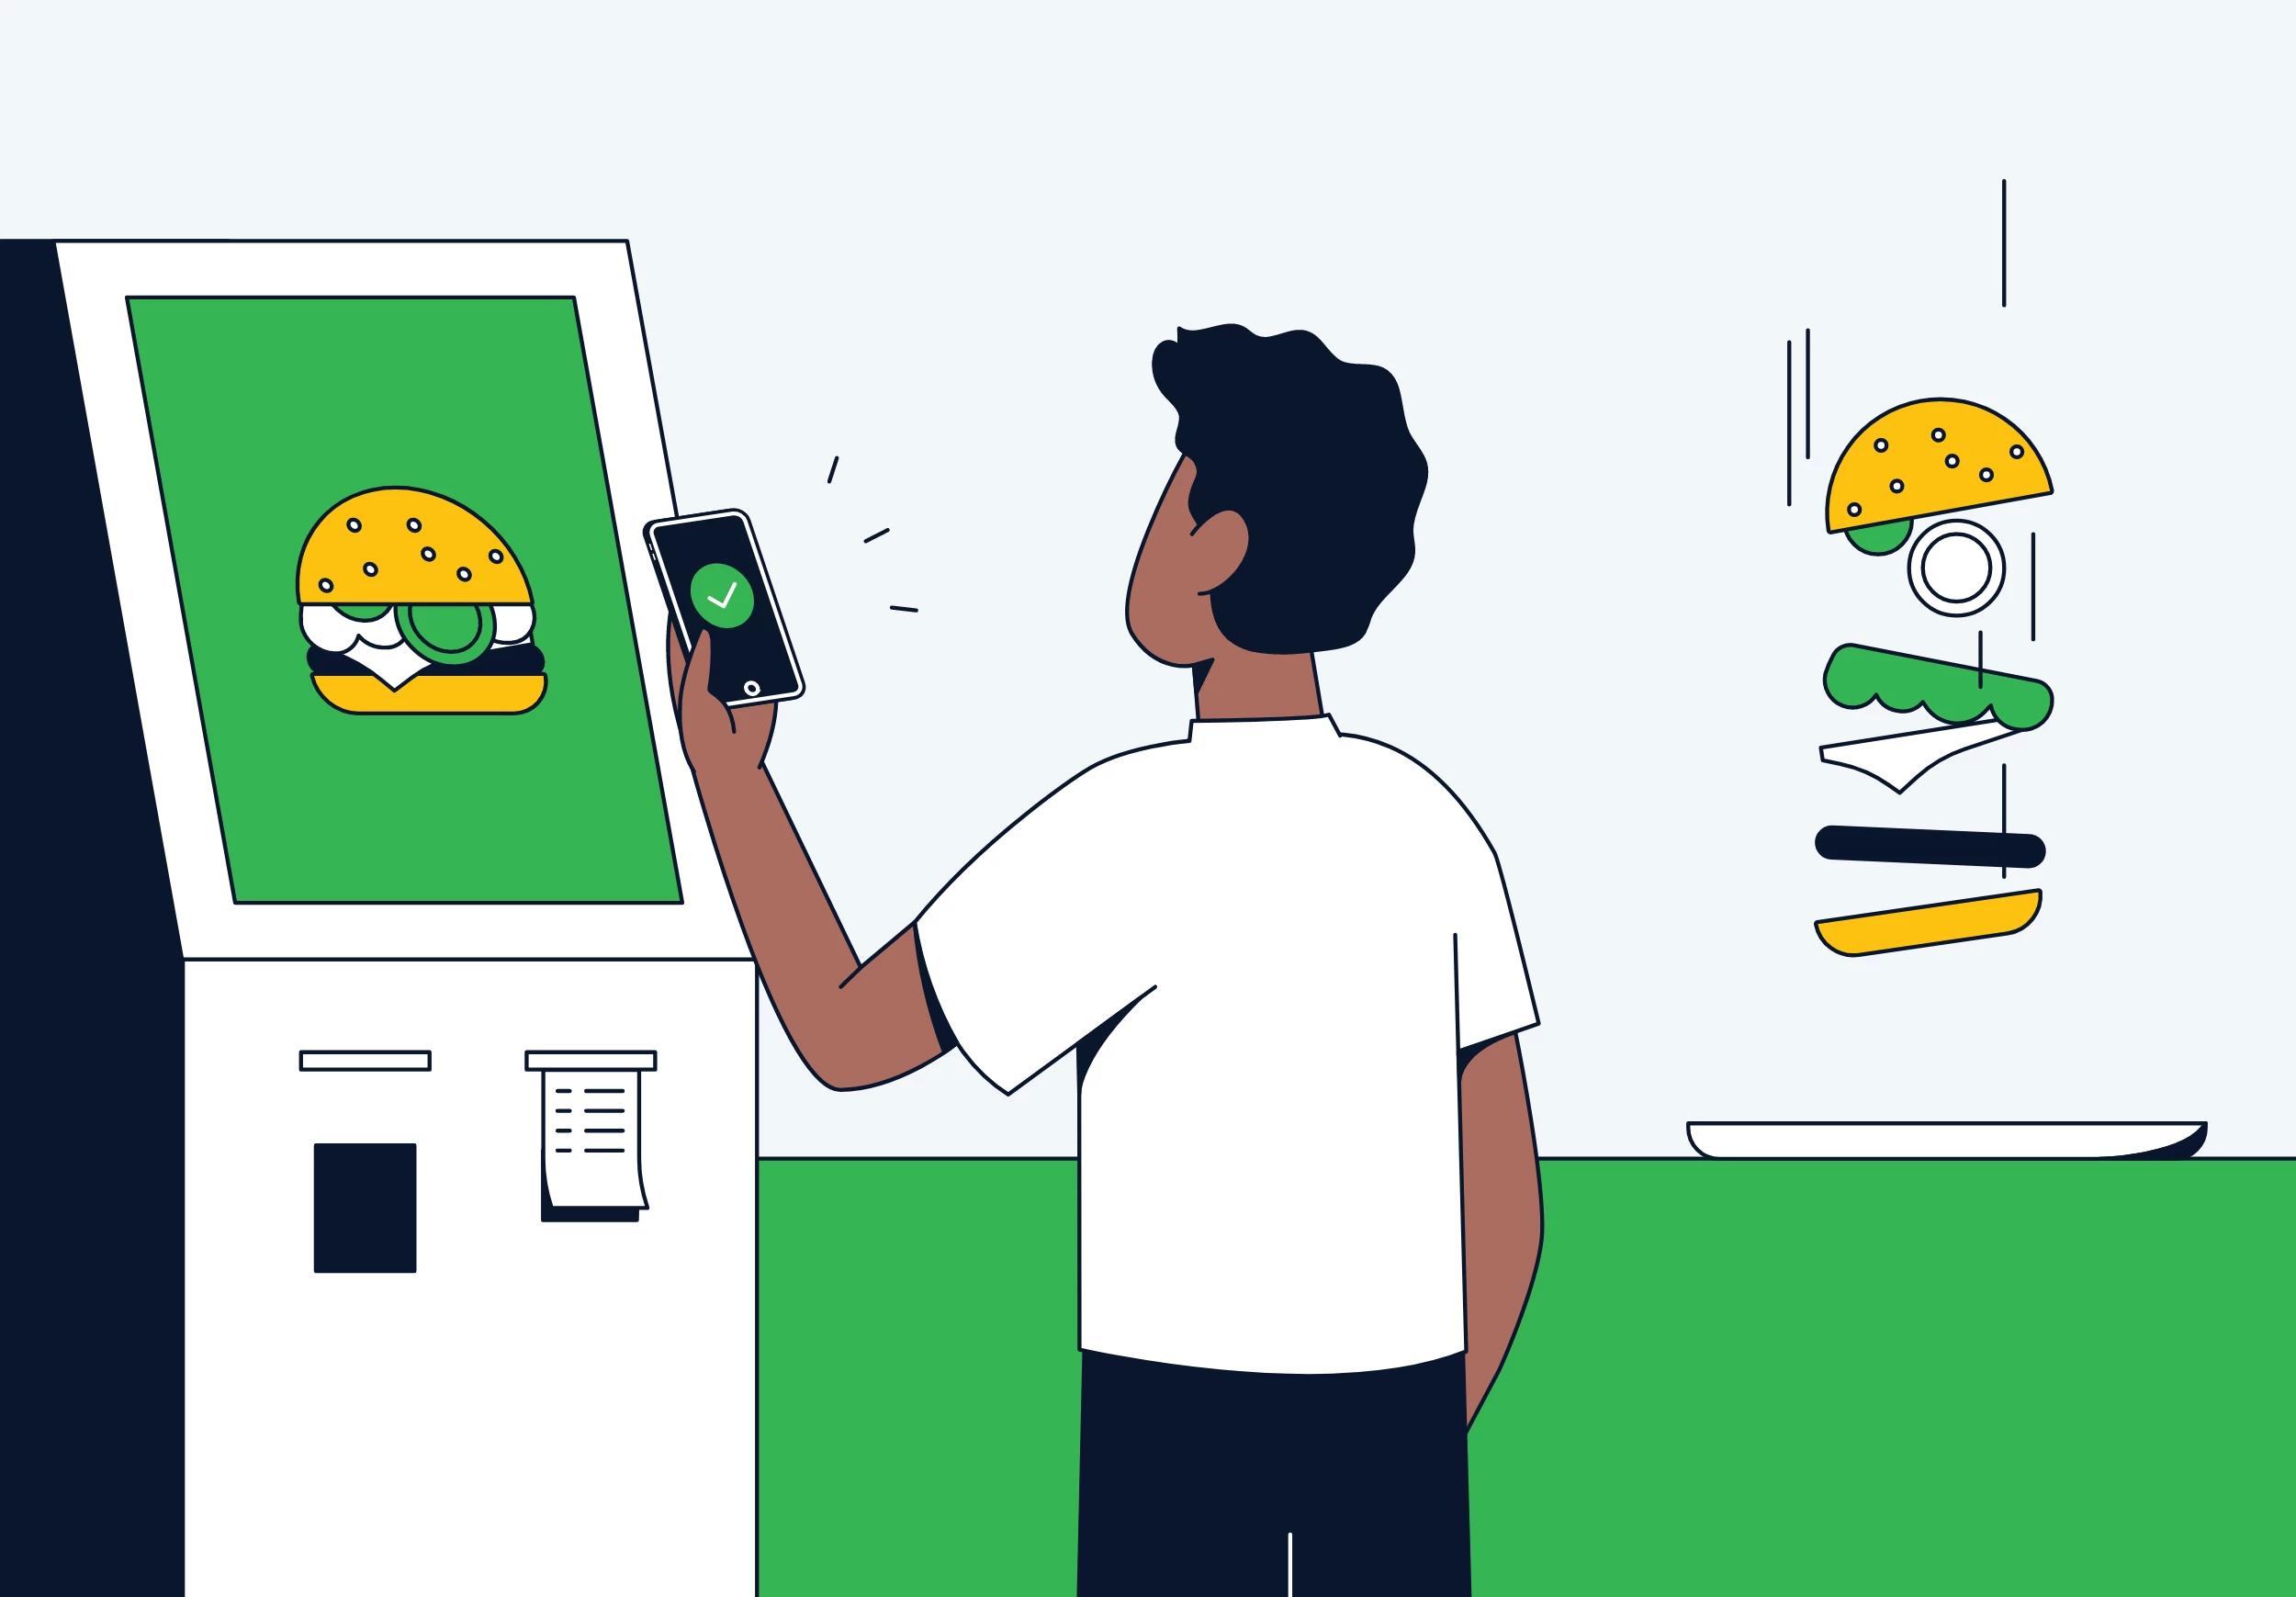 Illustration of man paying for a hamburger with his phone